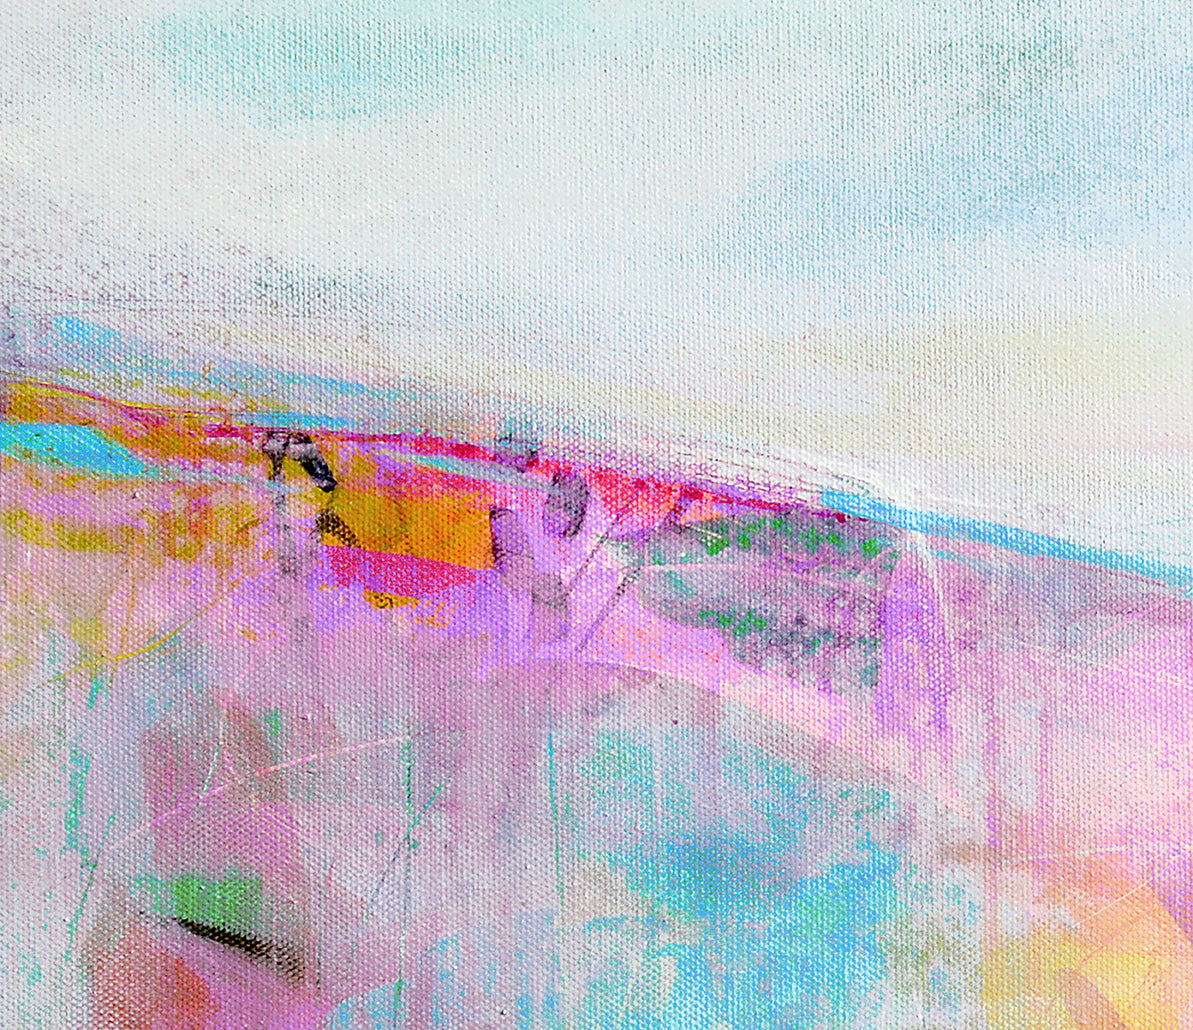 Pink Abstract Landscape Wall Art Print on Stretched Canvas or Fine Art Paper